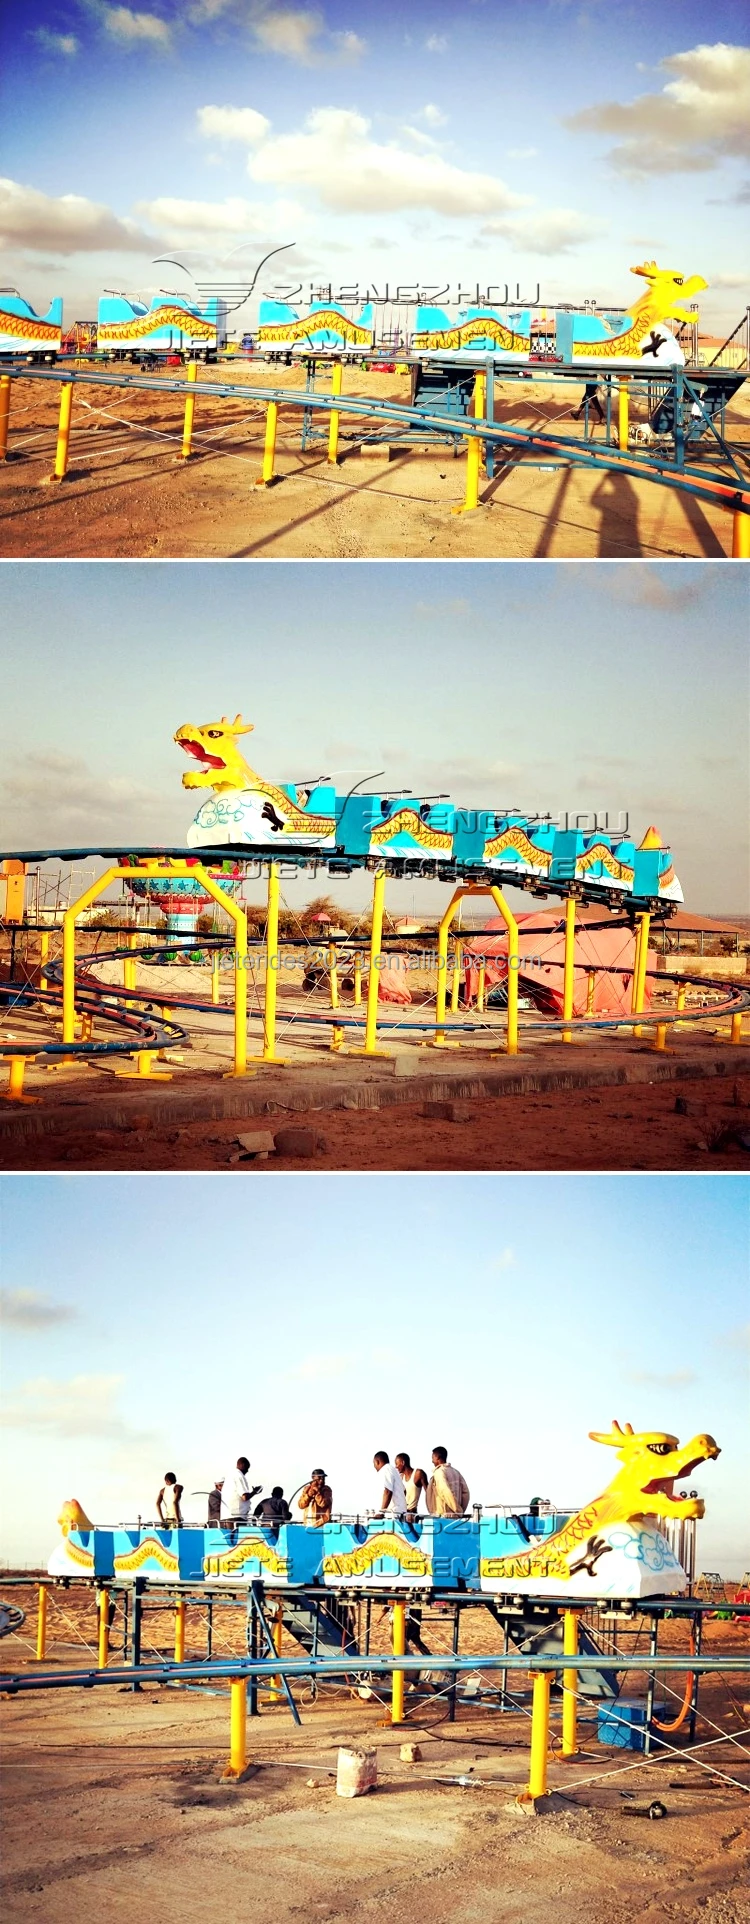 Popular Carnival Fair Rides For Themed Park Amusement Attraction Dragon Roller Coaster Train For Sale